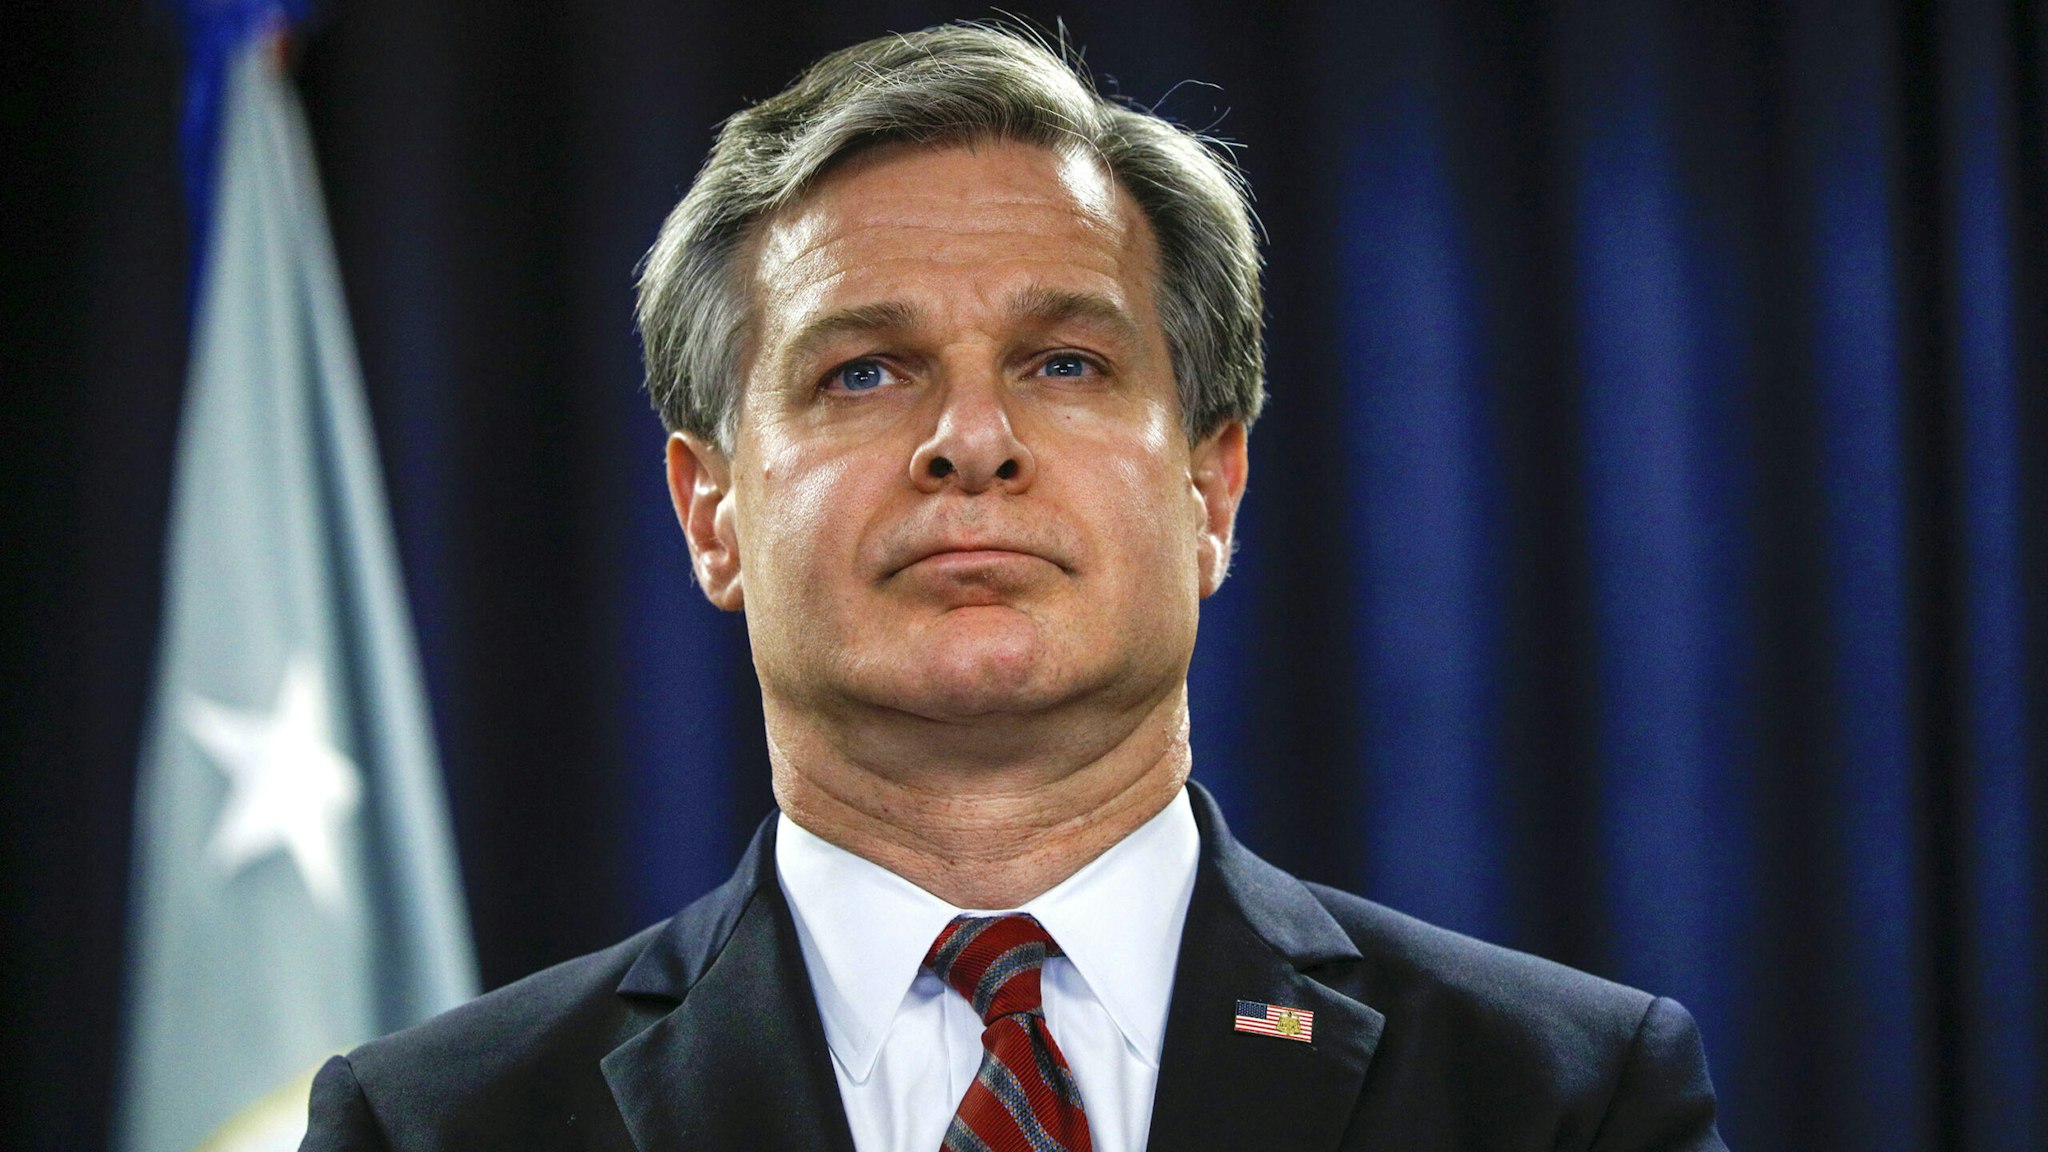 FBI Director Christopher Wray waits to speak at the announcement of a new Crime Reduction Initiative designed to reduce crime in Detroit on December 18, 2019 in Detroit, Michigan.